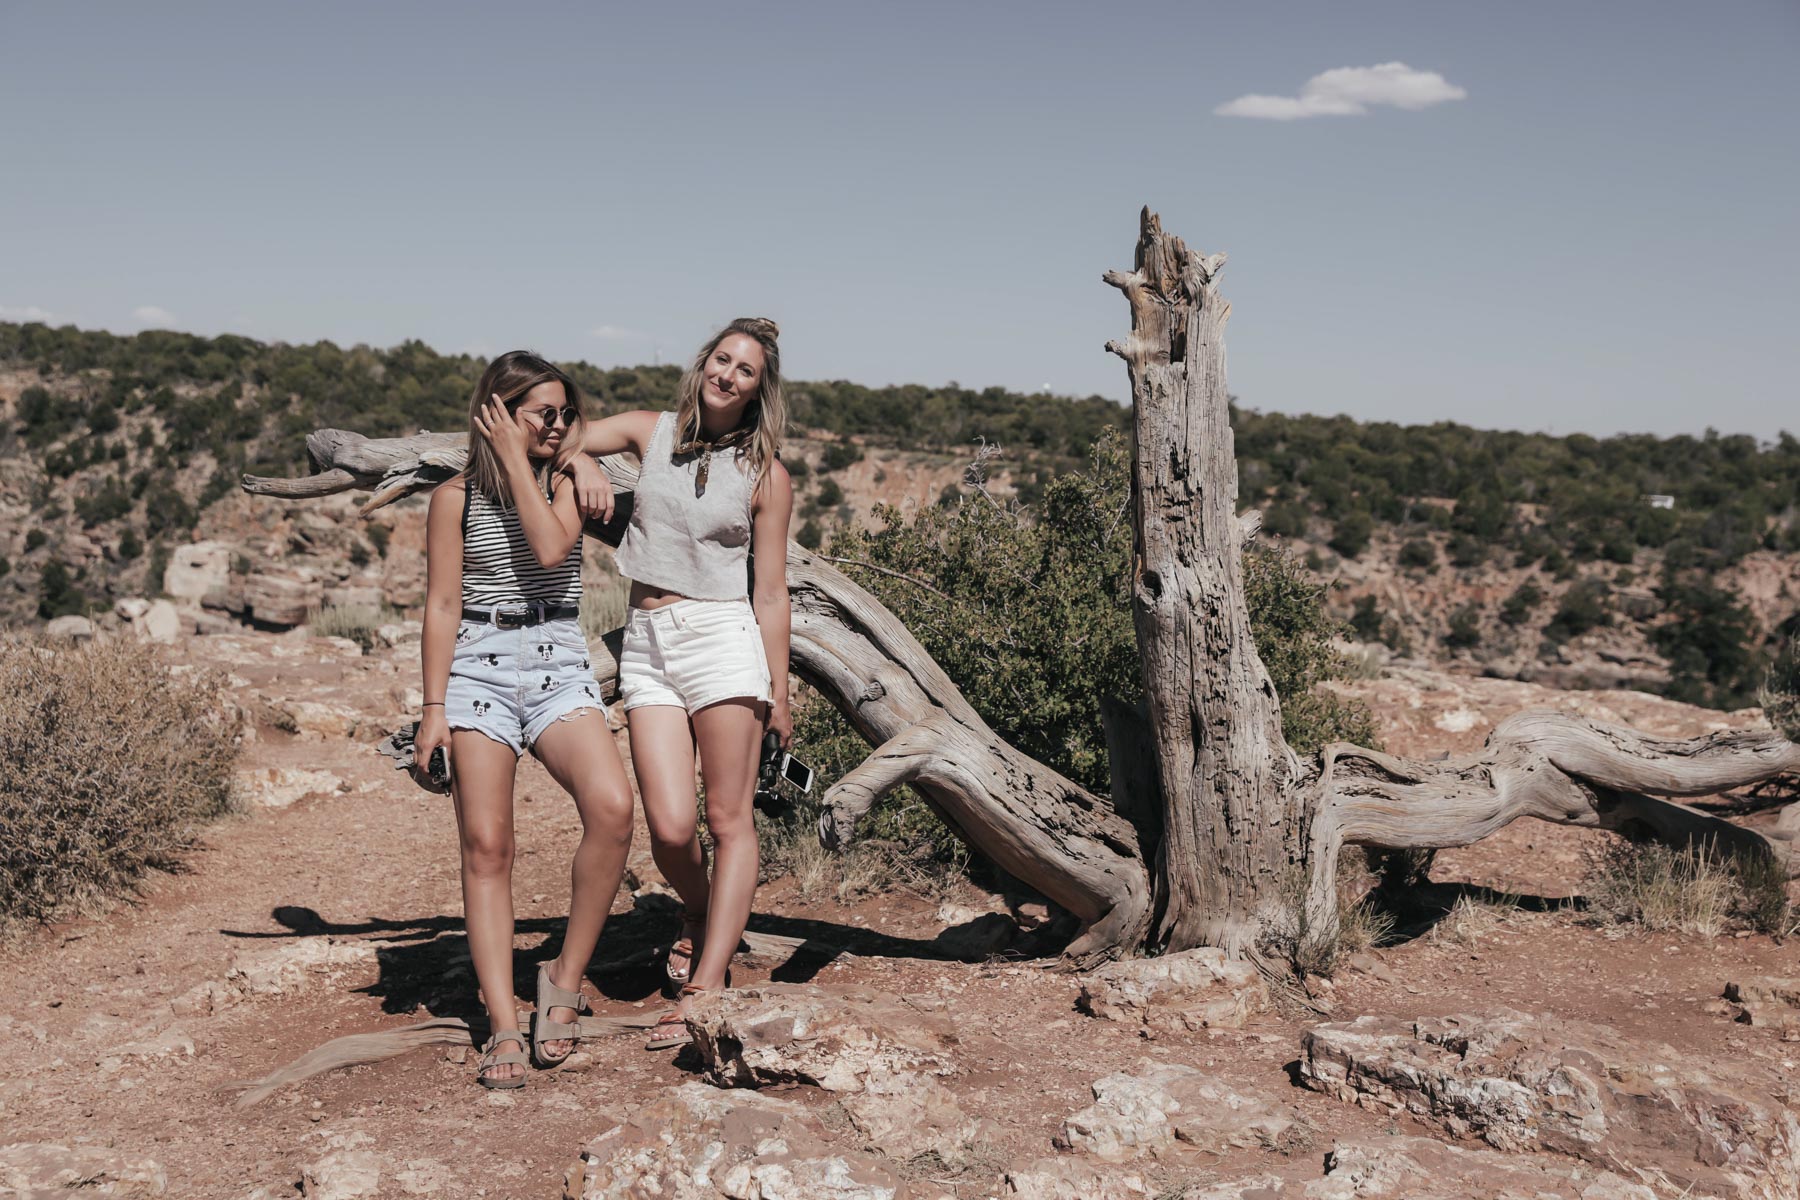 5 Places To Make Friends In Your Twenties (That Aren’t Awkward)